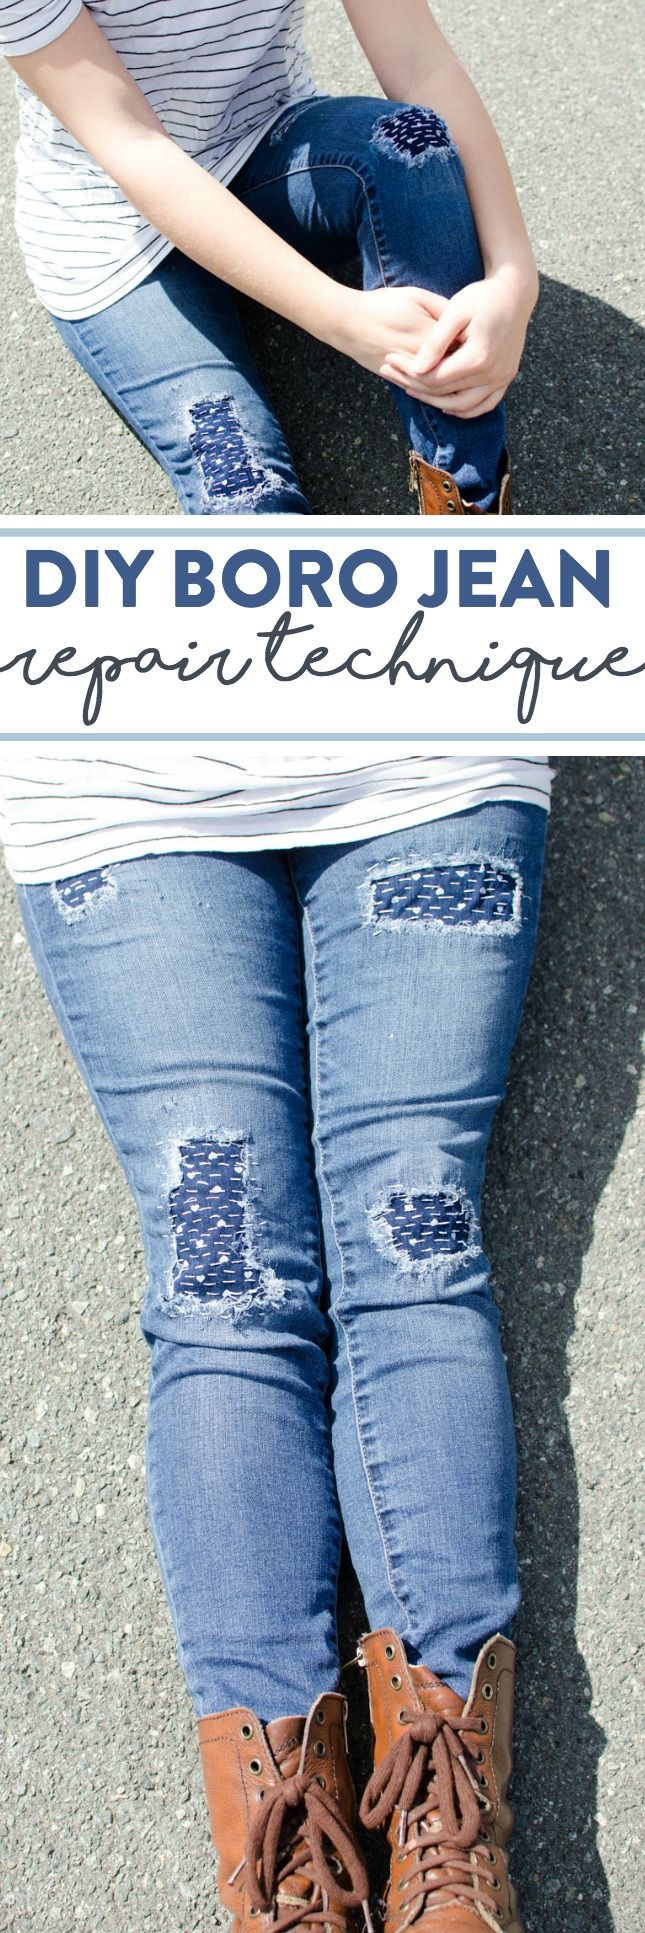 DIY Boro Jeans Repair | the new trendy way to fix up old jeans - While this is a...